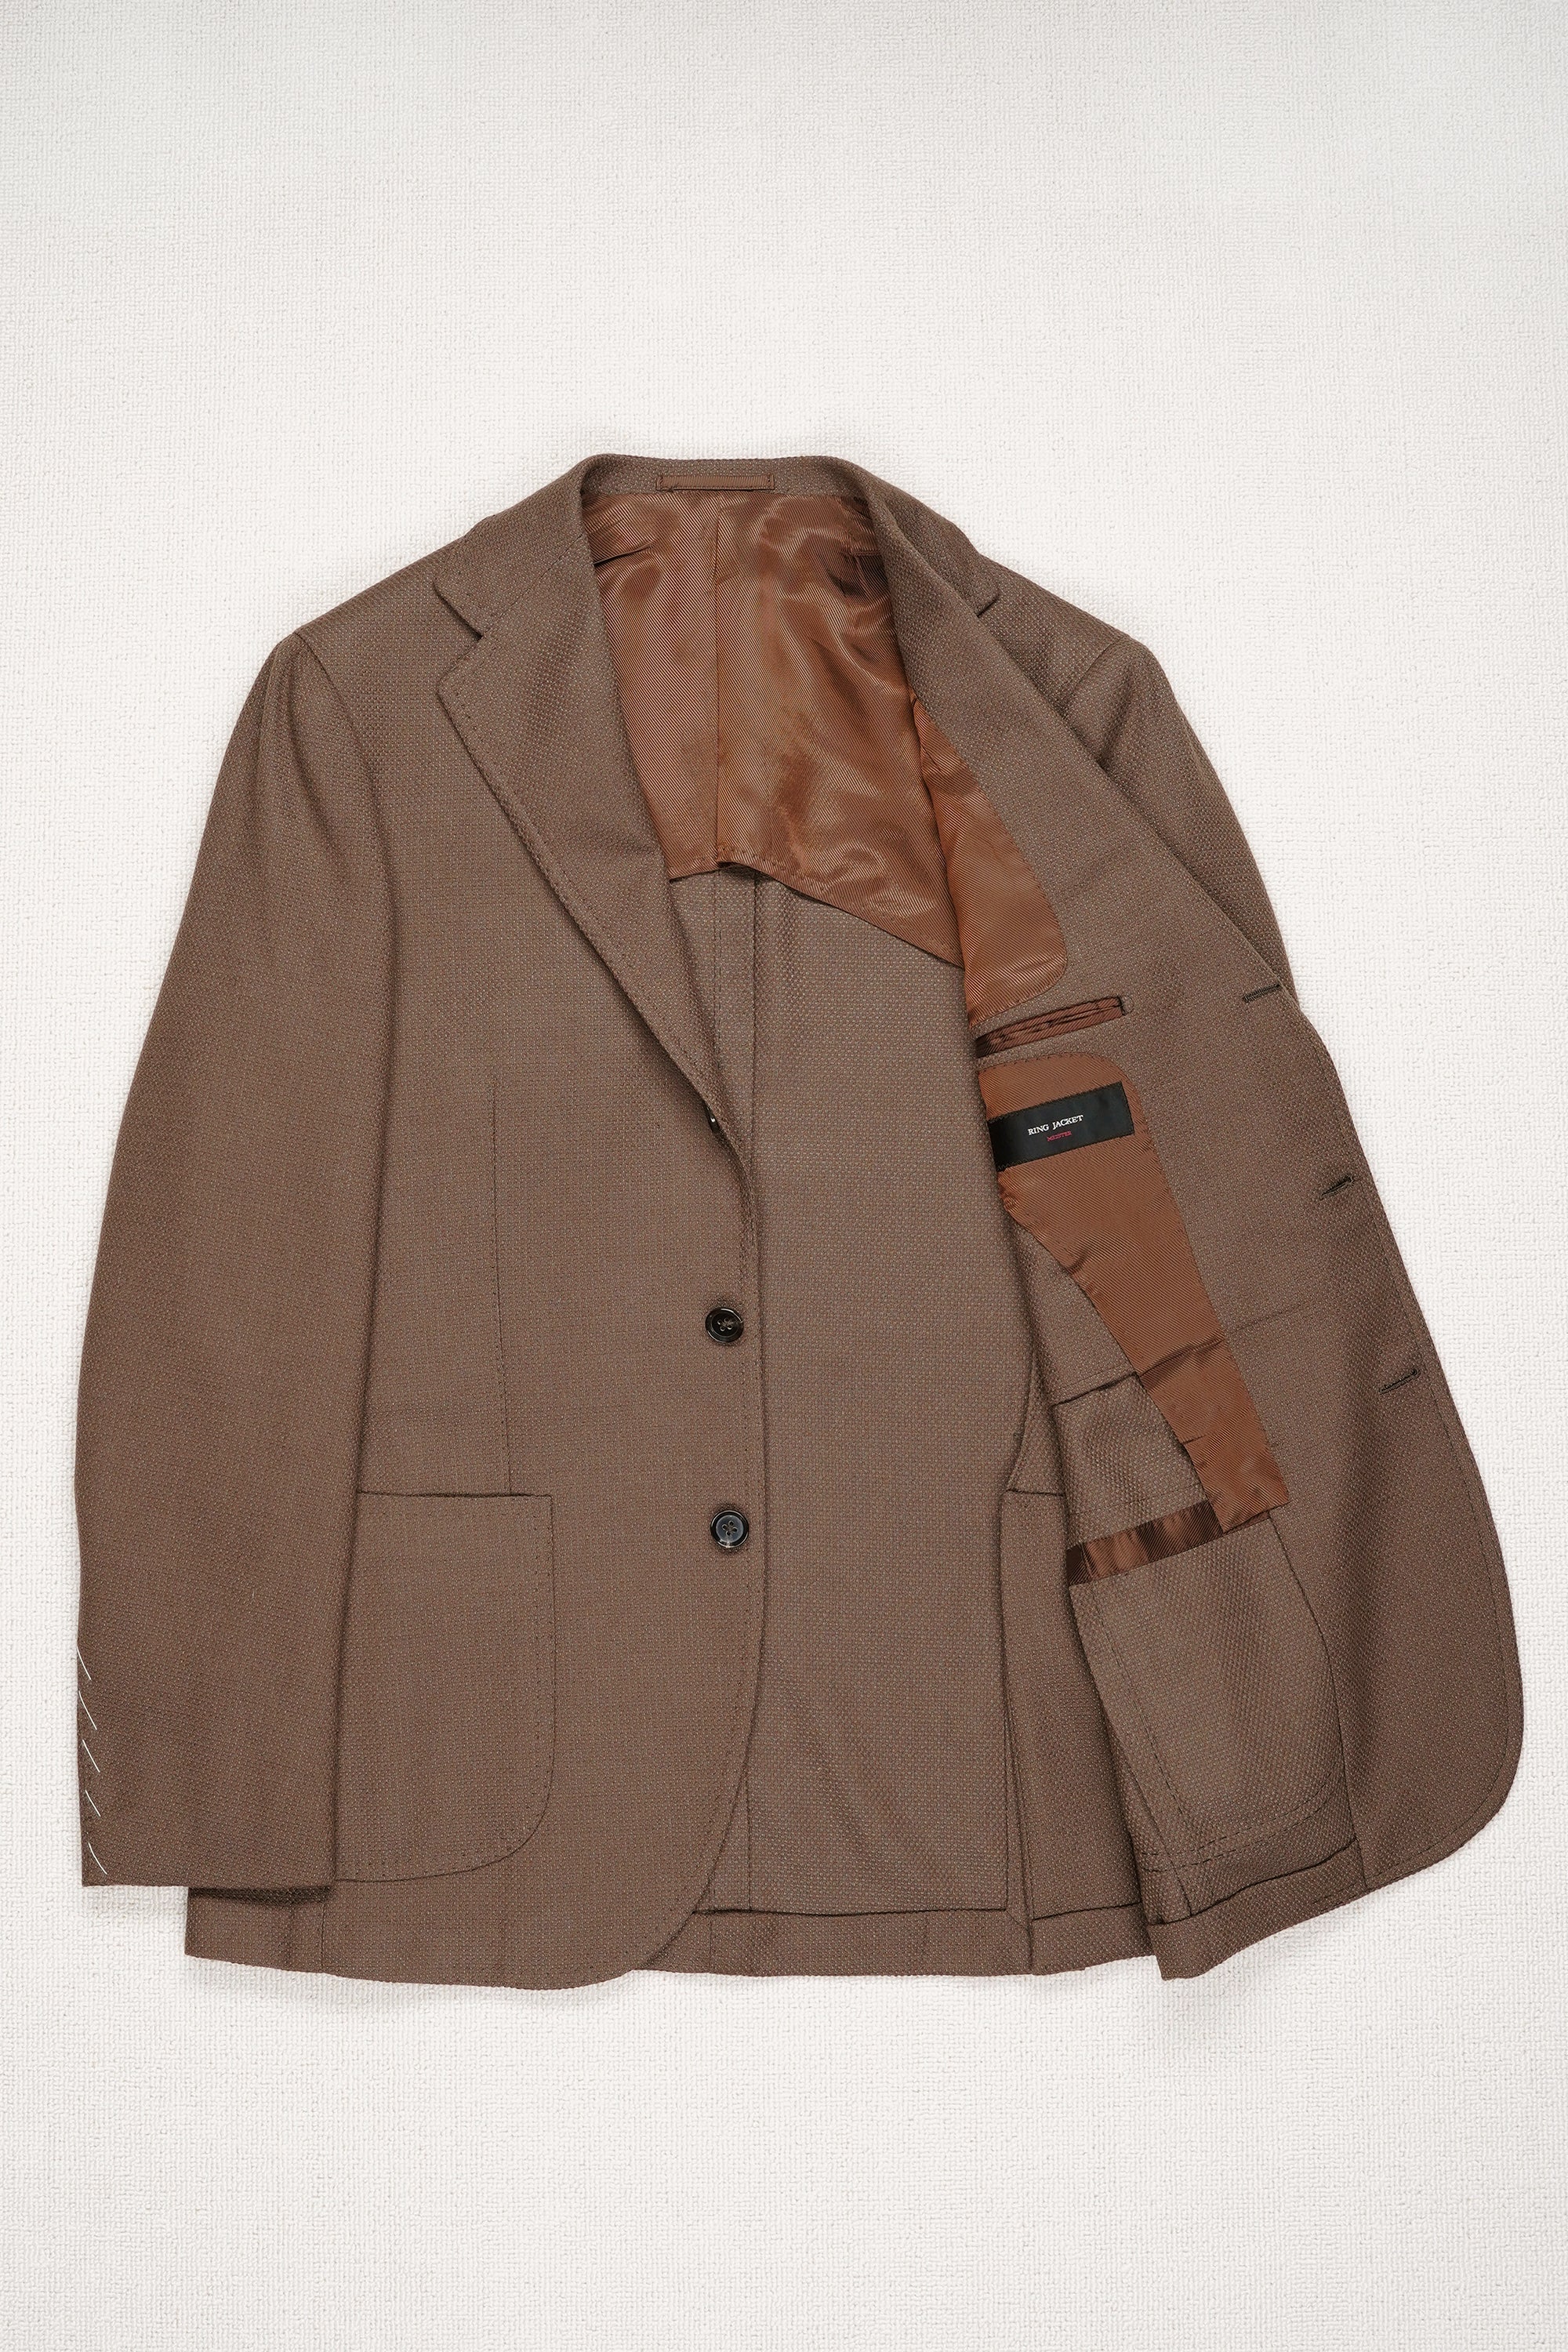 Ring Jacket Meister Model 254FH Brown Wool/Cashmere/Silk Sport Coat